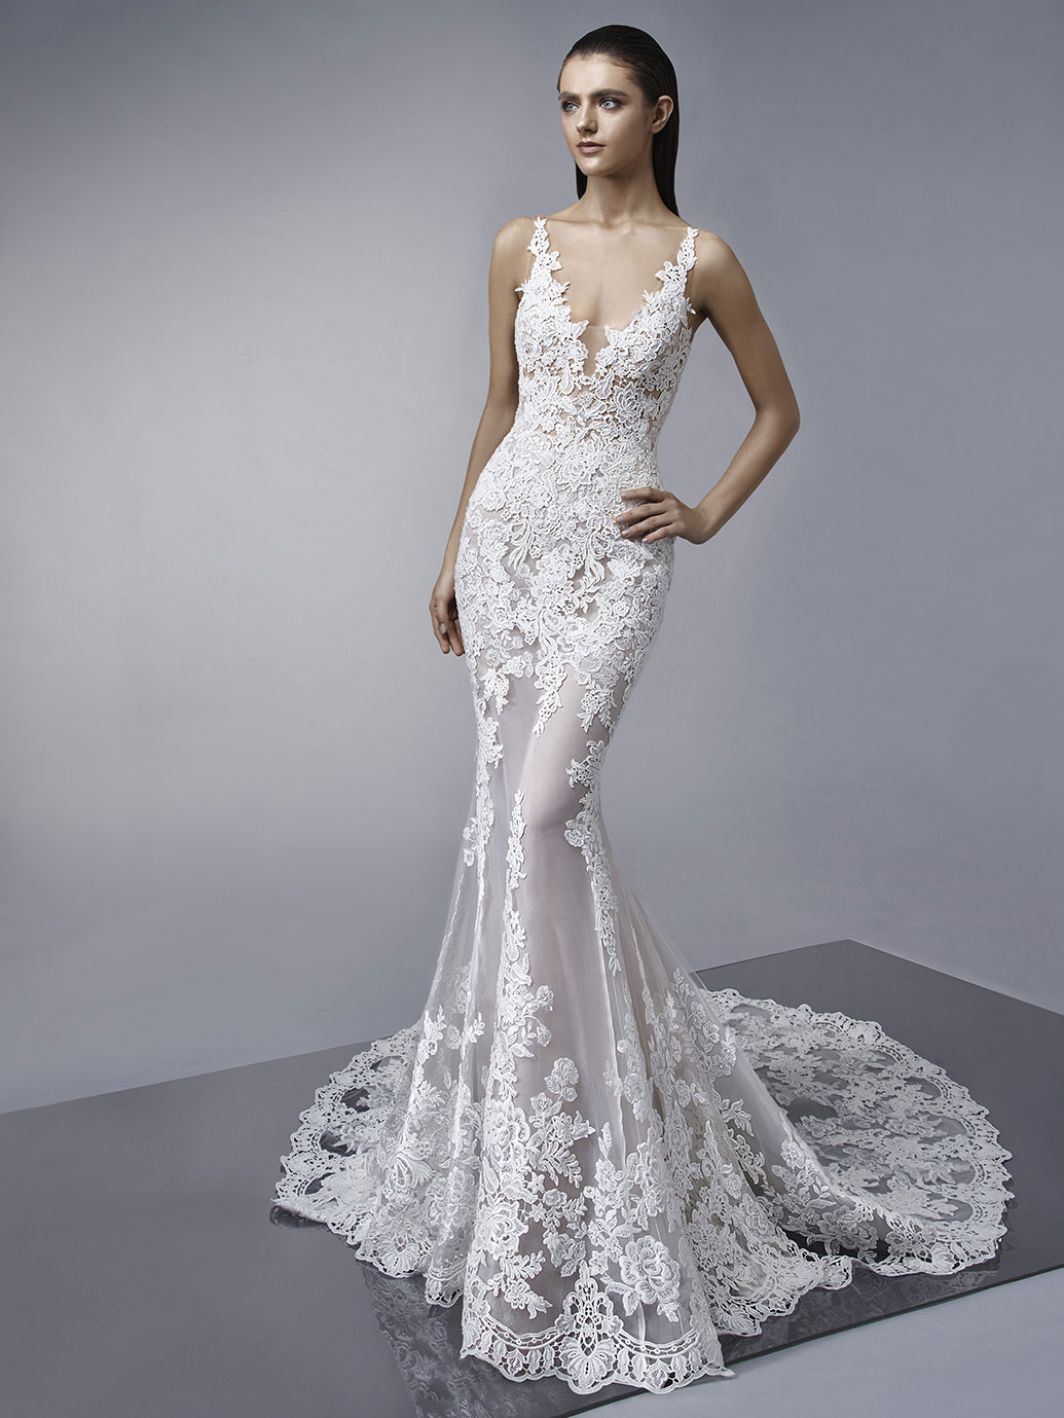 enzoani mckinley price online sale up to 70 off on enzoani wedding dress cost